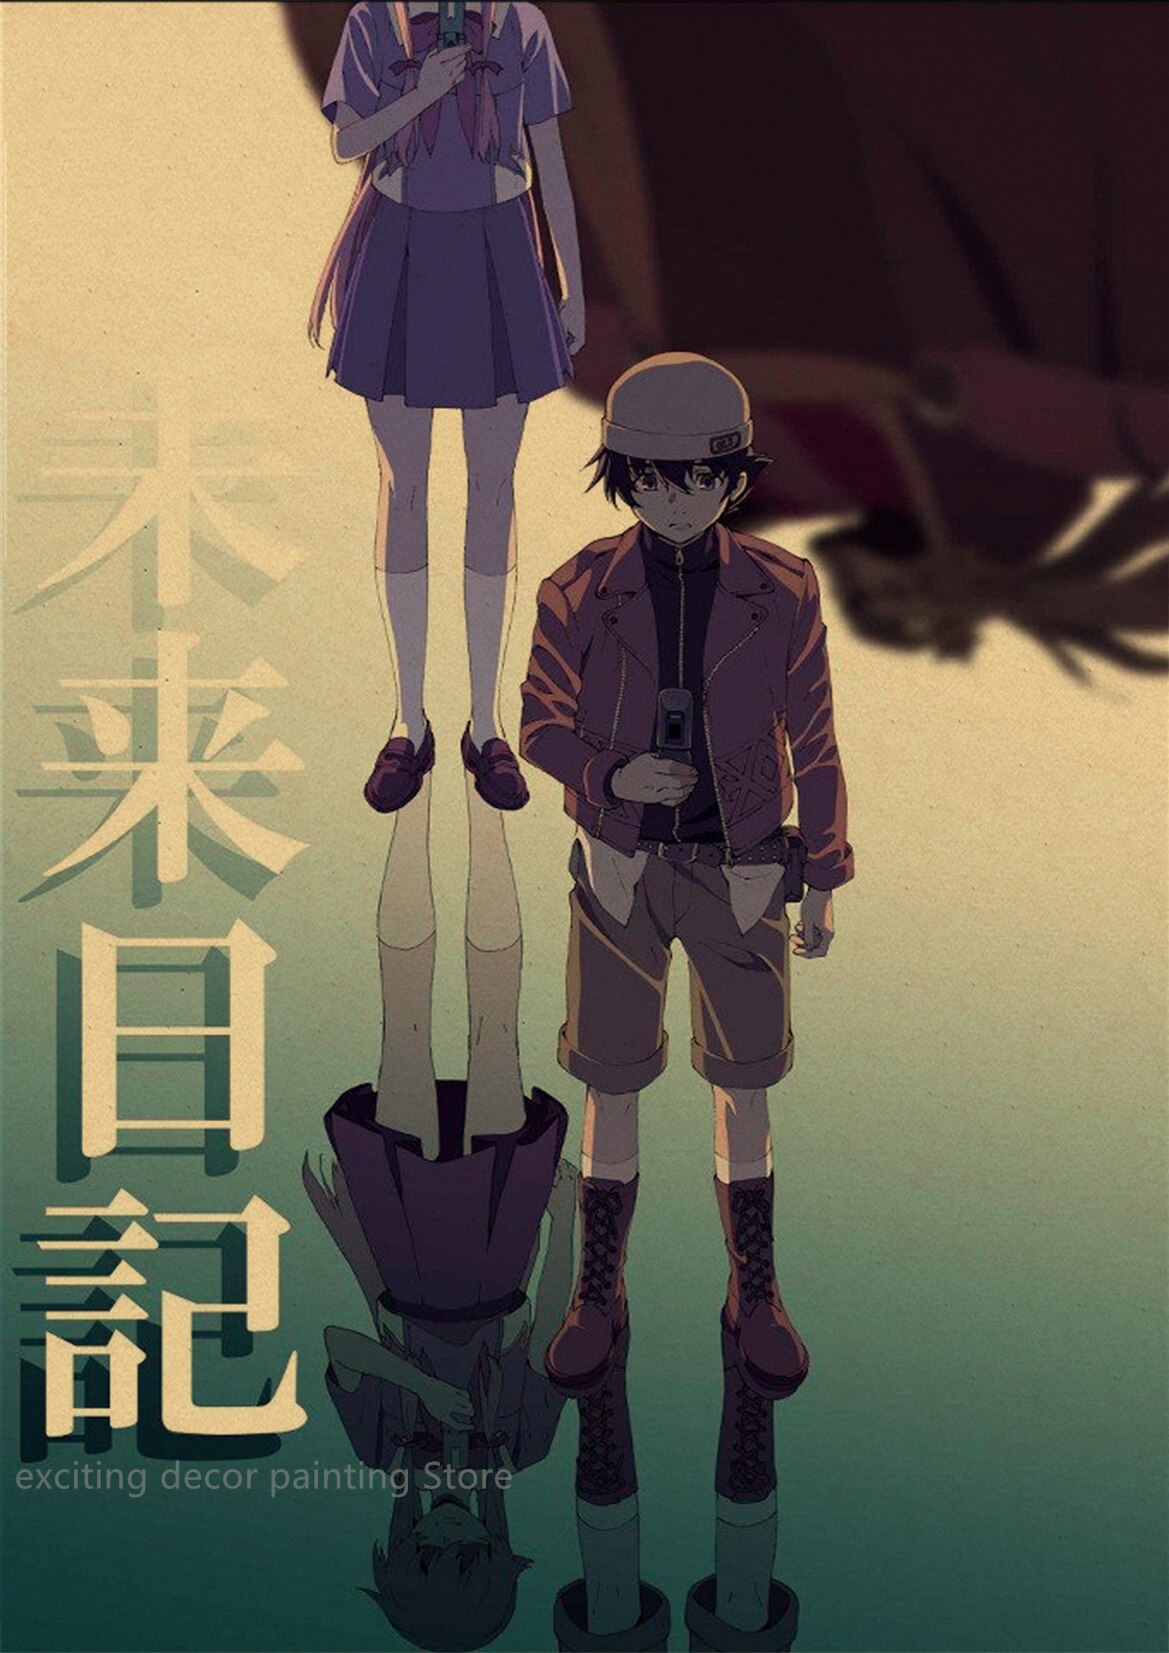 Future Diary Reflections Poster